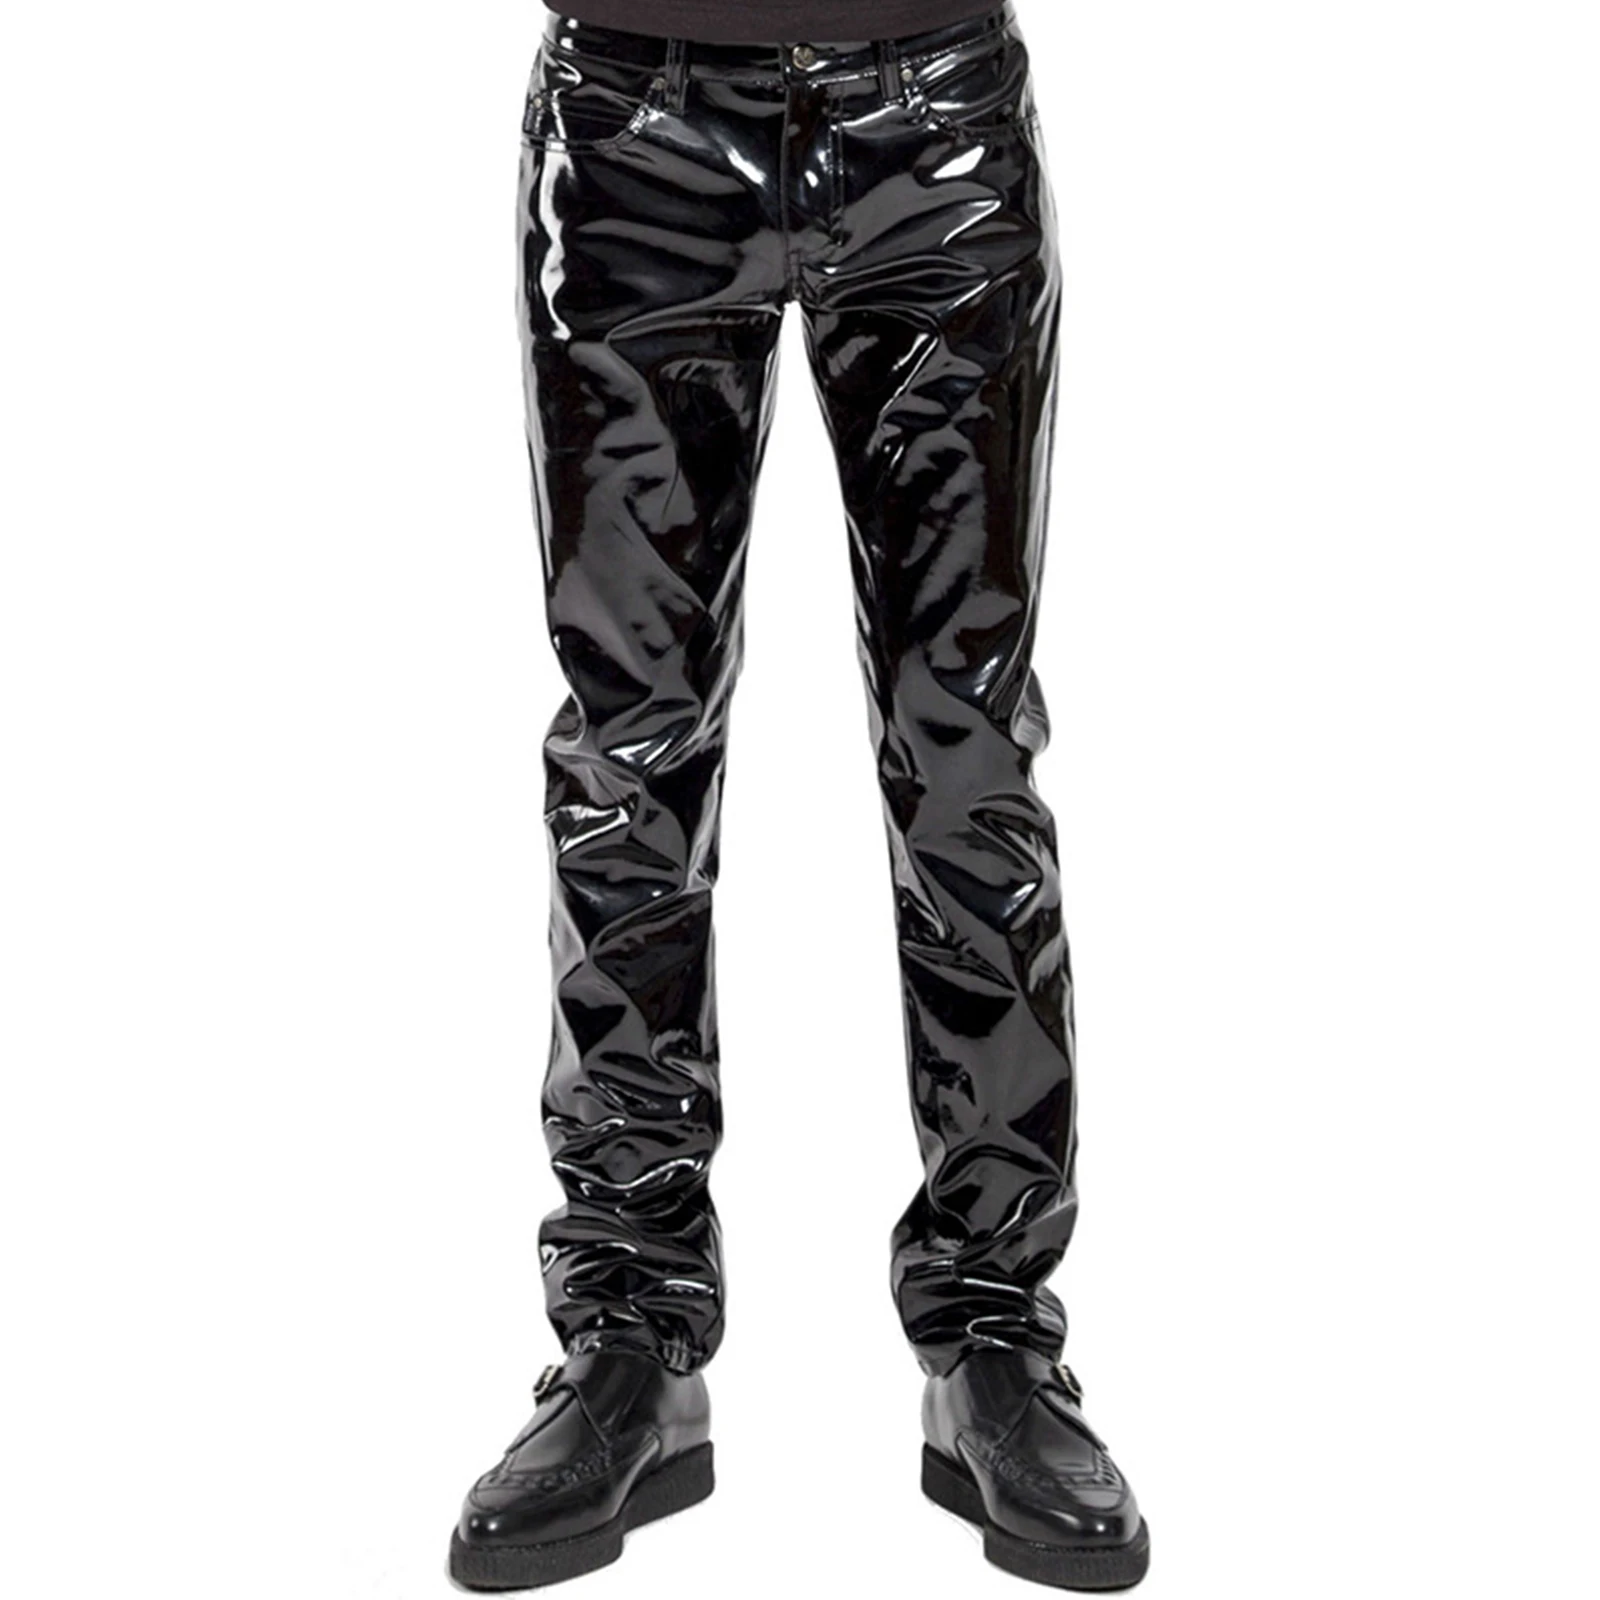 Men Latex Long Pants Shiny Wet Look PU Leather Pants Glossy Mid Waist Straight Trousers Party Bar Nightclub Stage Show Costume